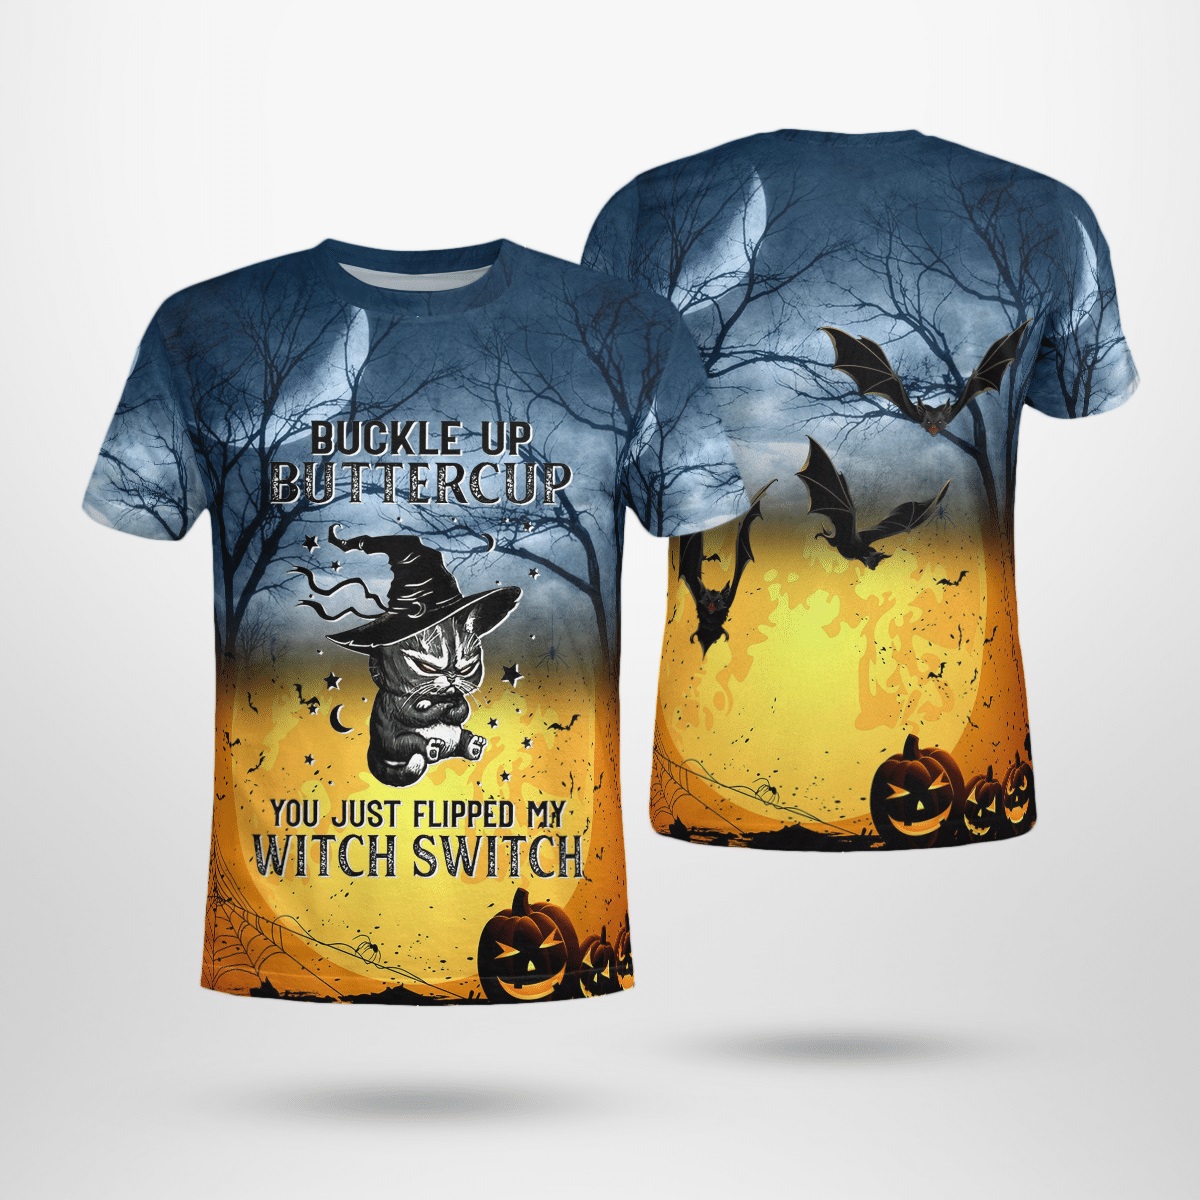 Cat Buckle up buttercup you just flipped my witch switch 3d t-shirt